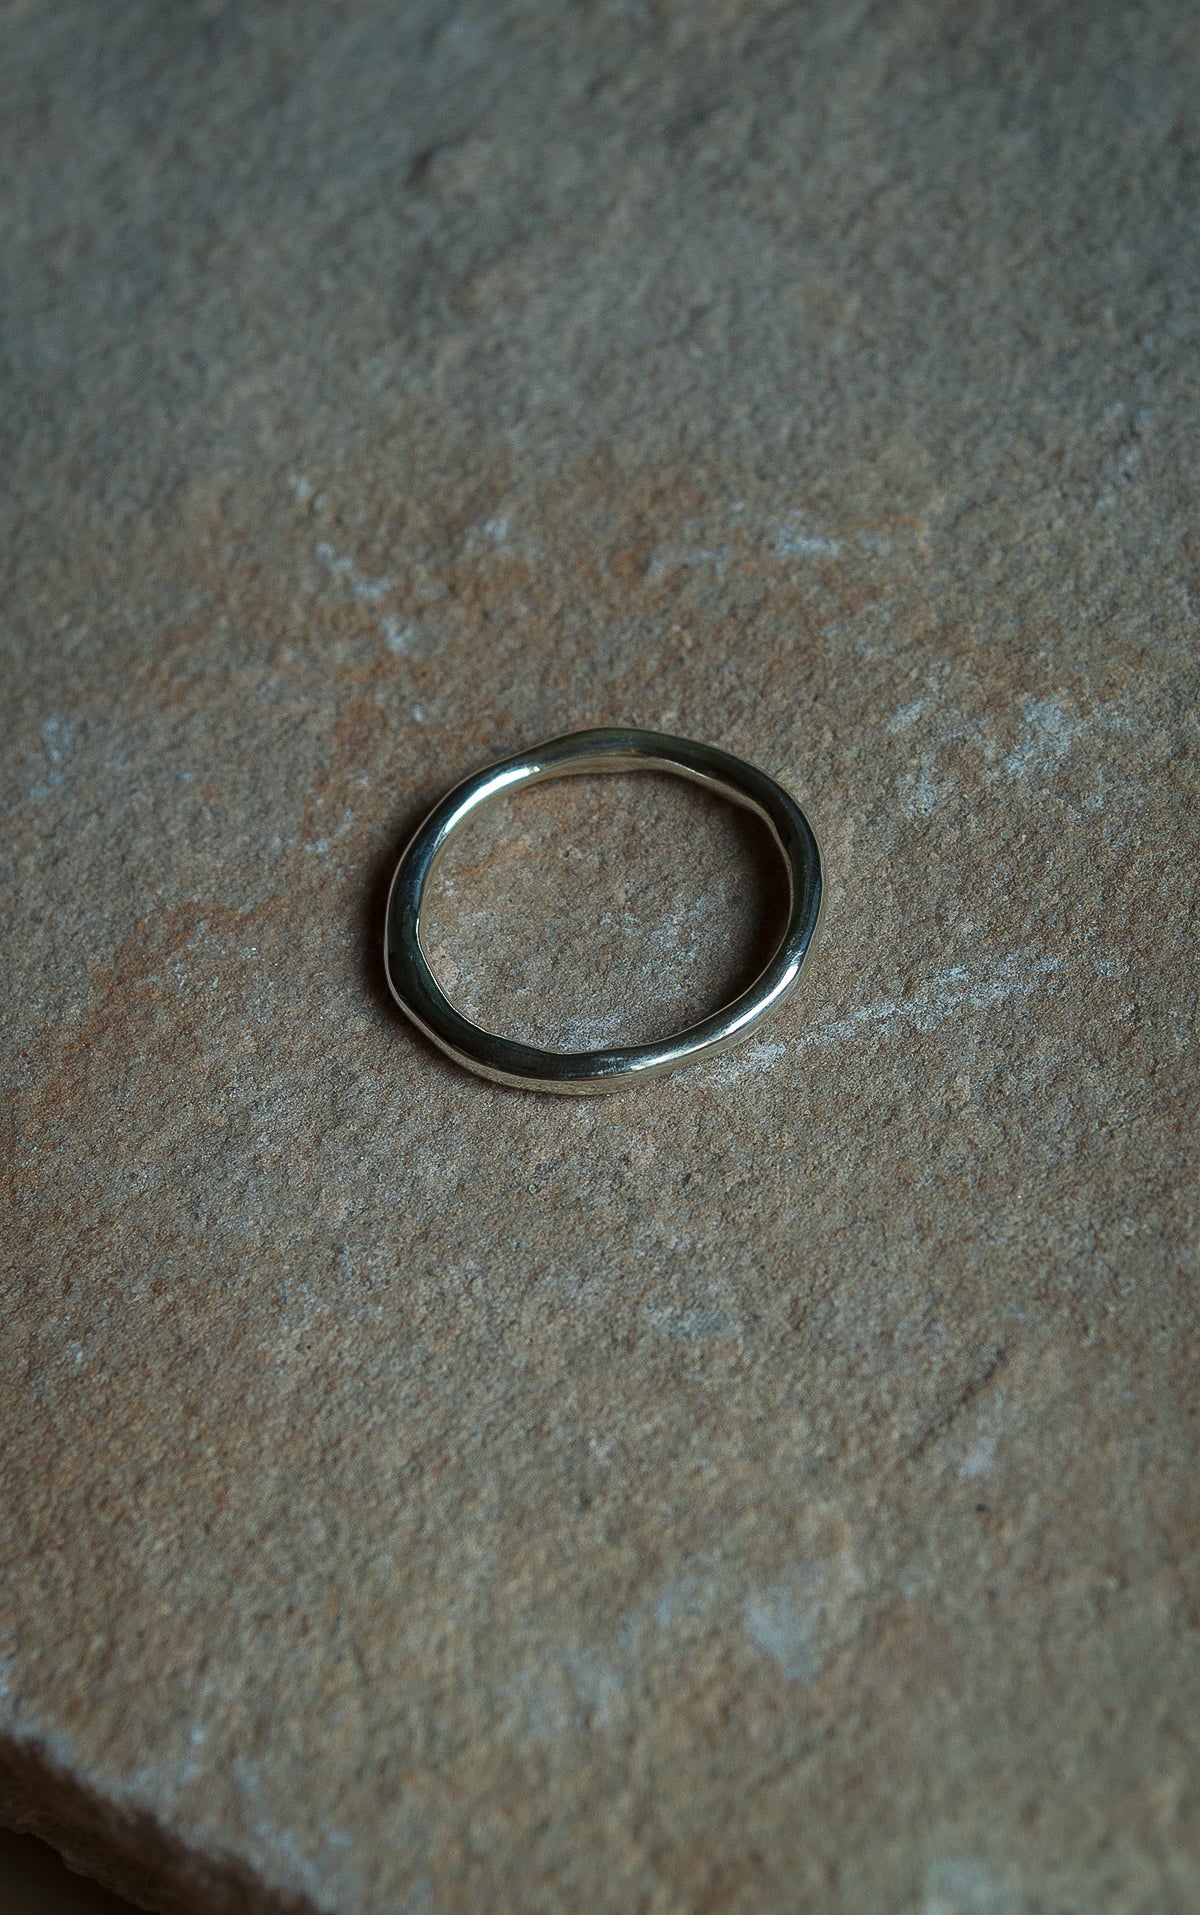 Nuance ring